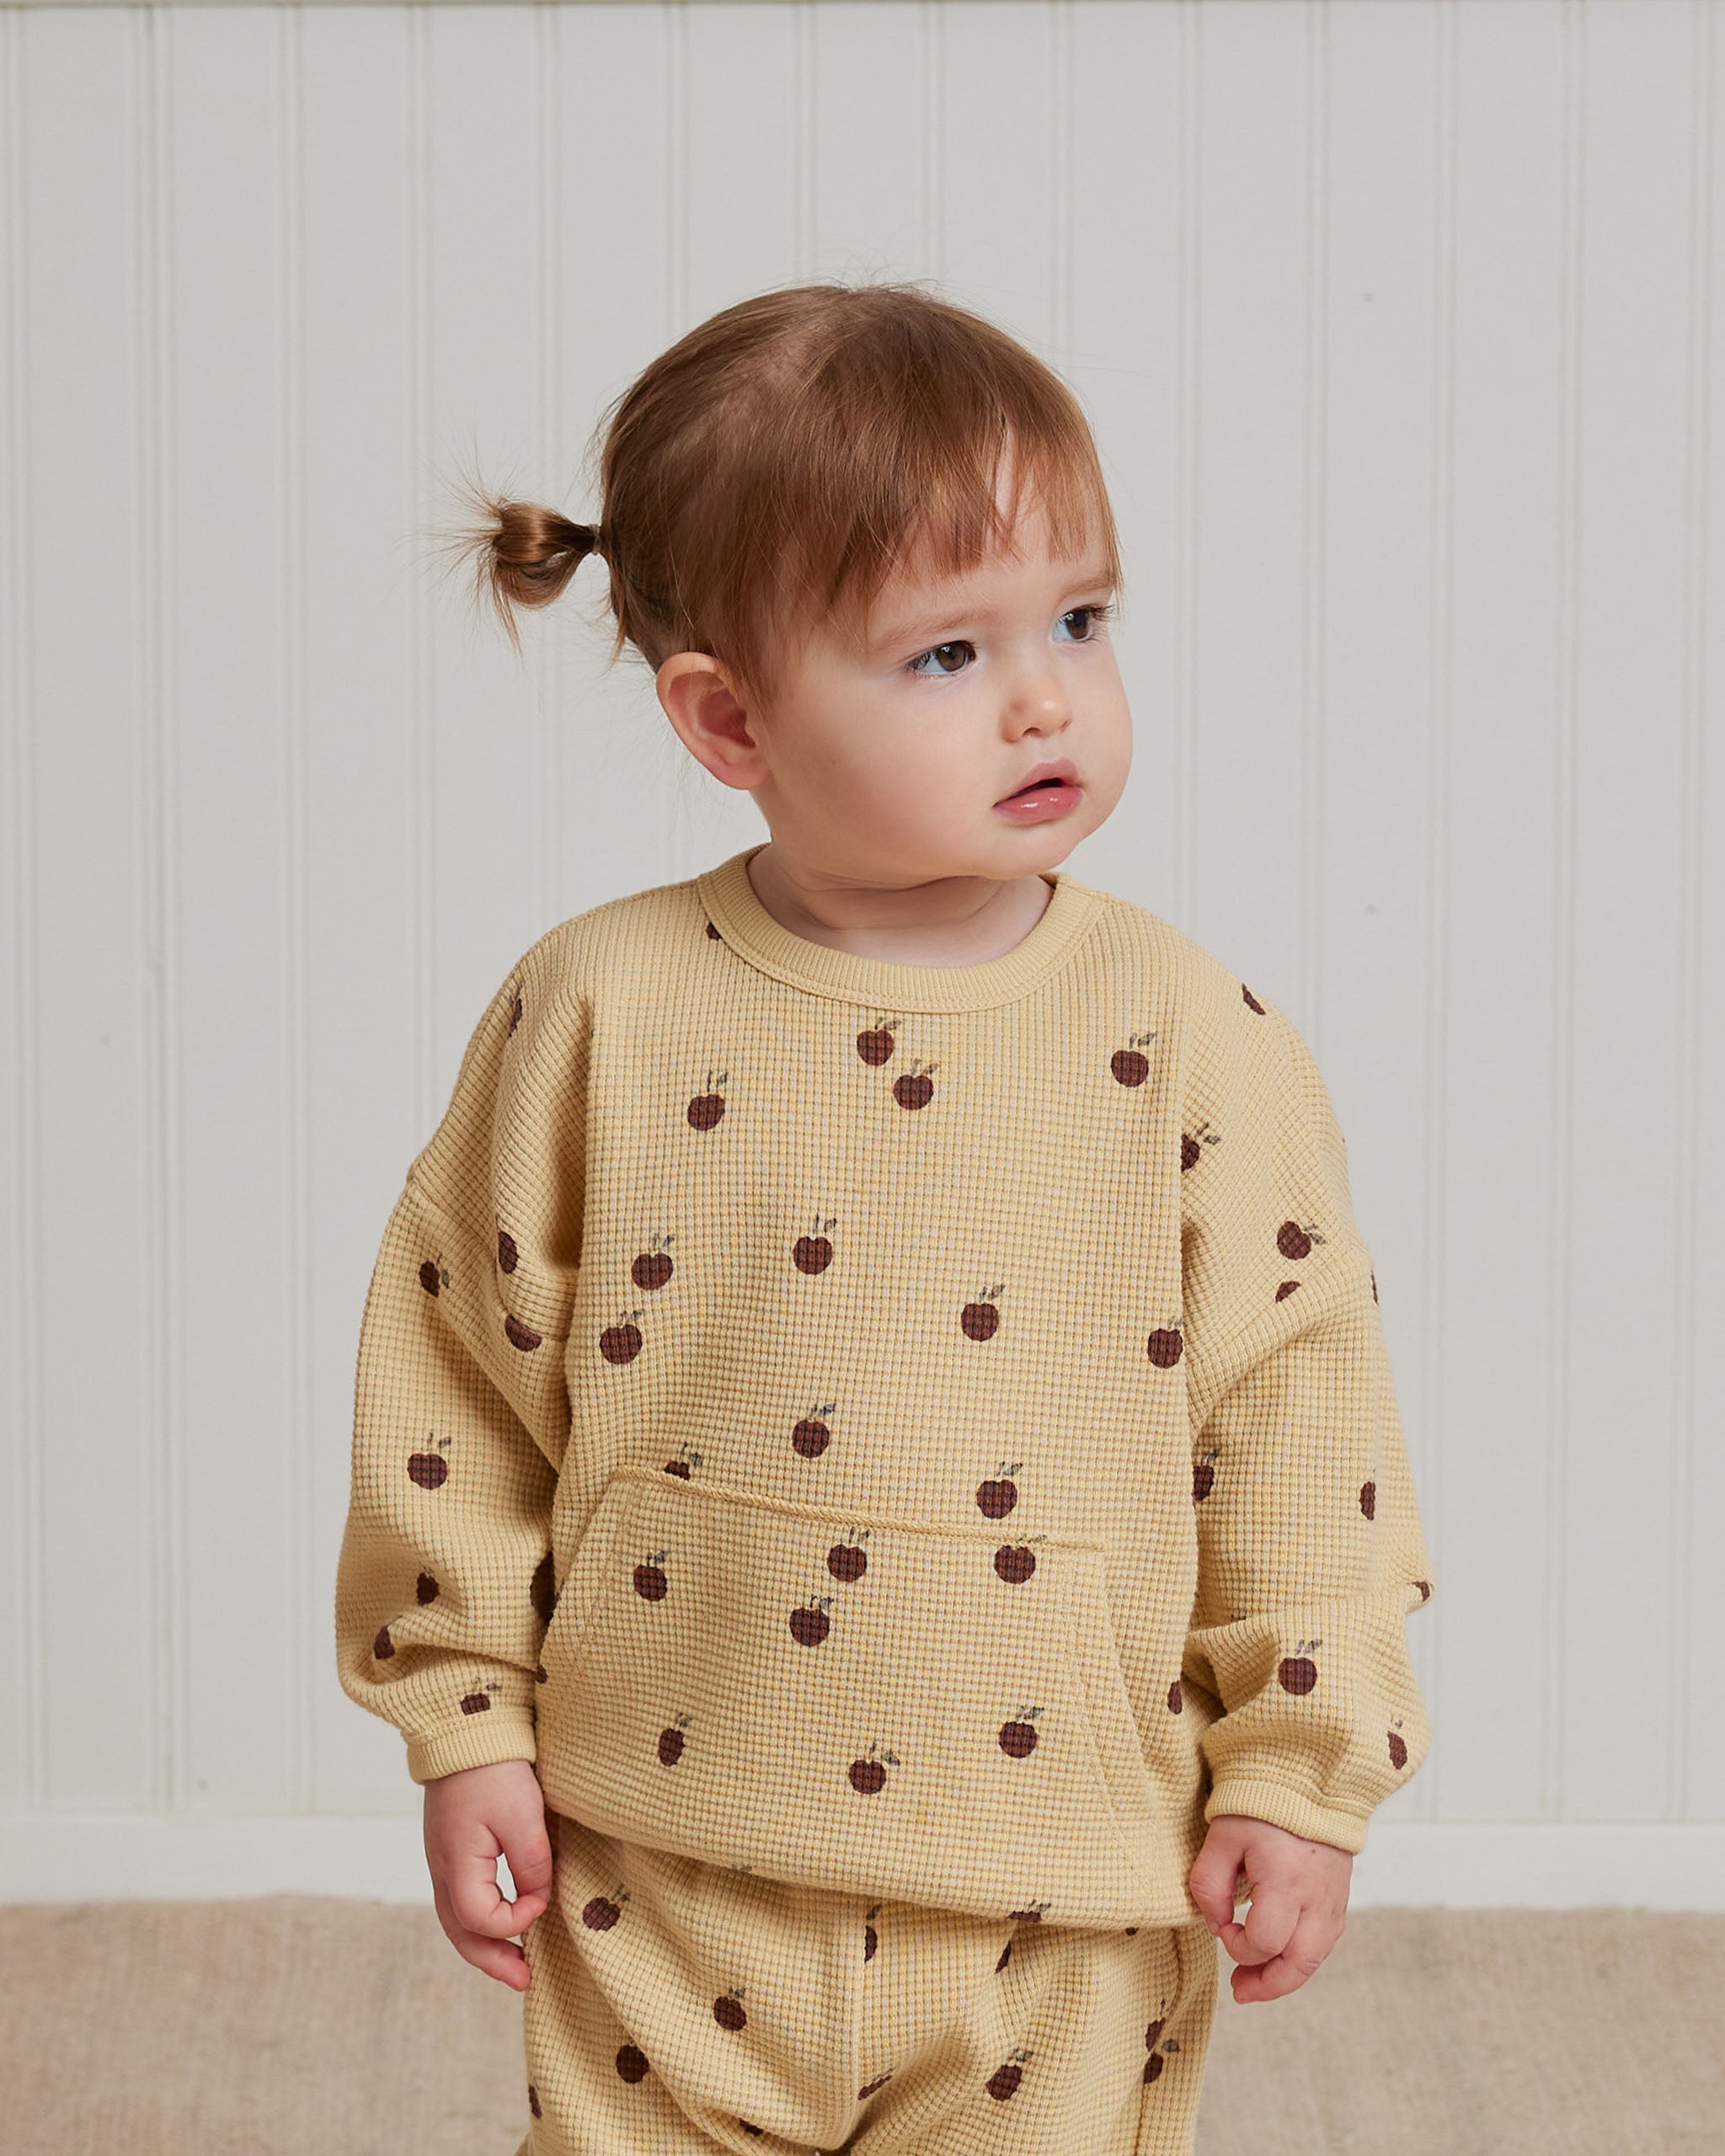 Waffle Sweater + Pant Set || Apples - Rylee + Cru | Kids Clothes | Trendy Baby Clothes | Modern Infant Outfits |